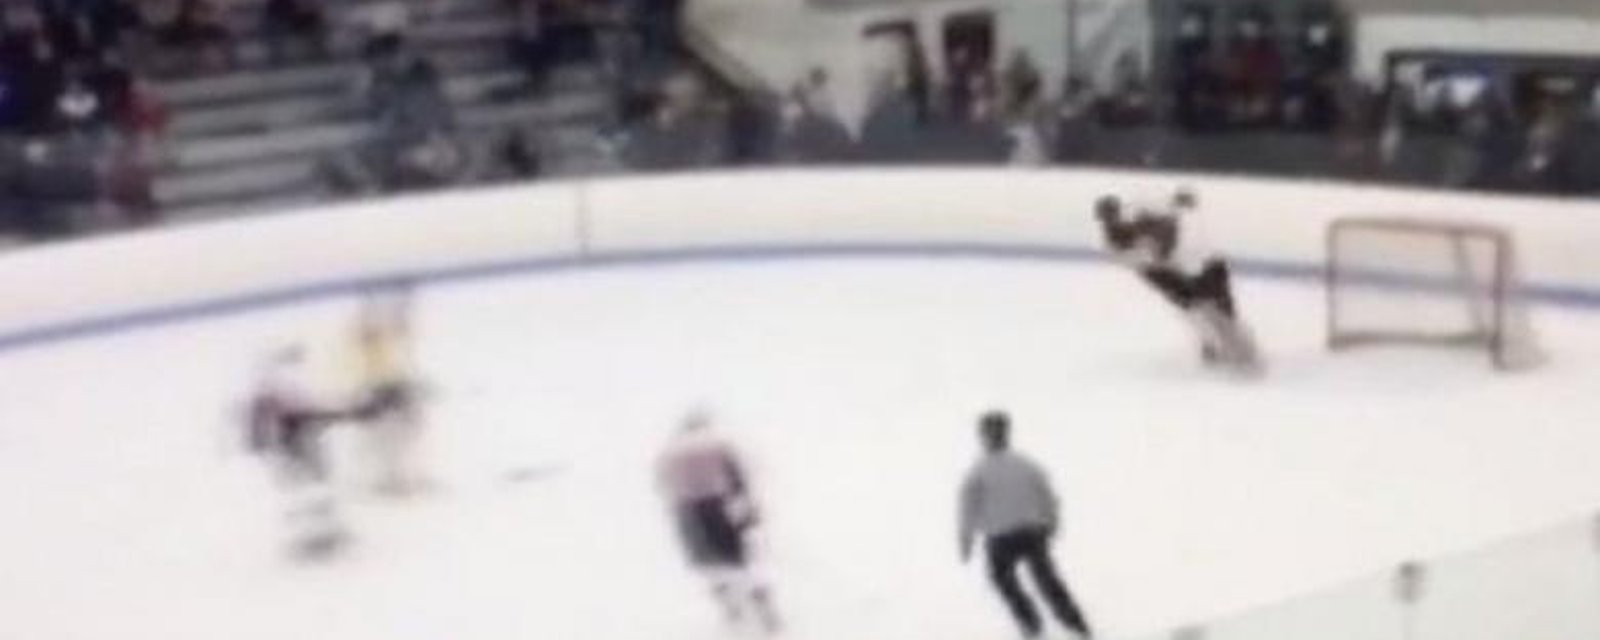 Goalie absolutely destroys player with HUGE hit.